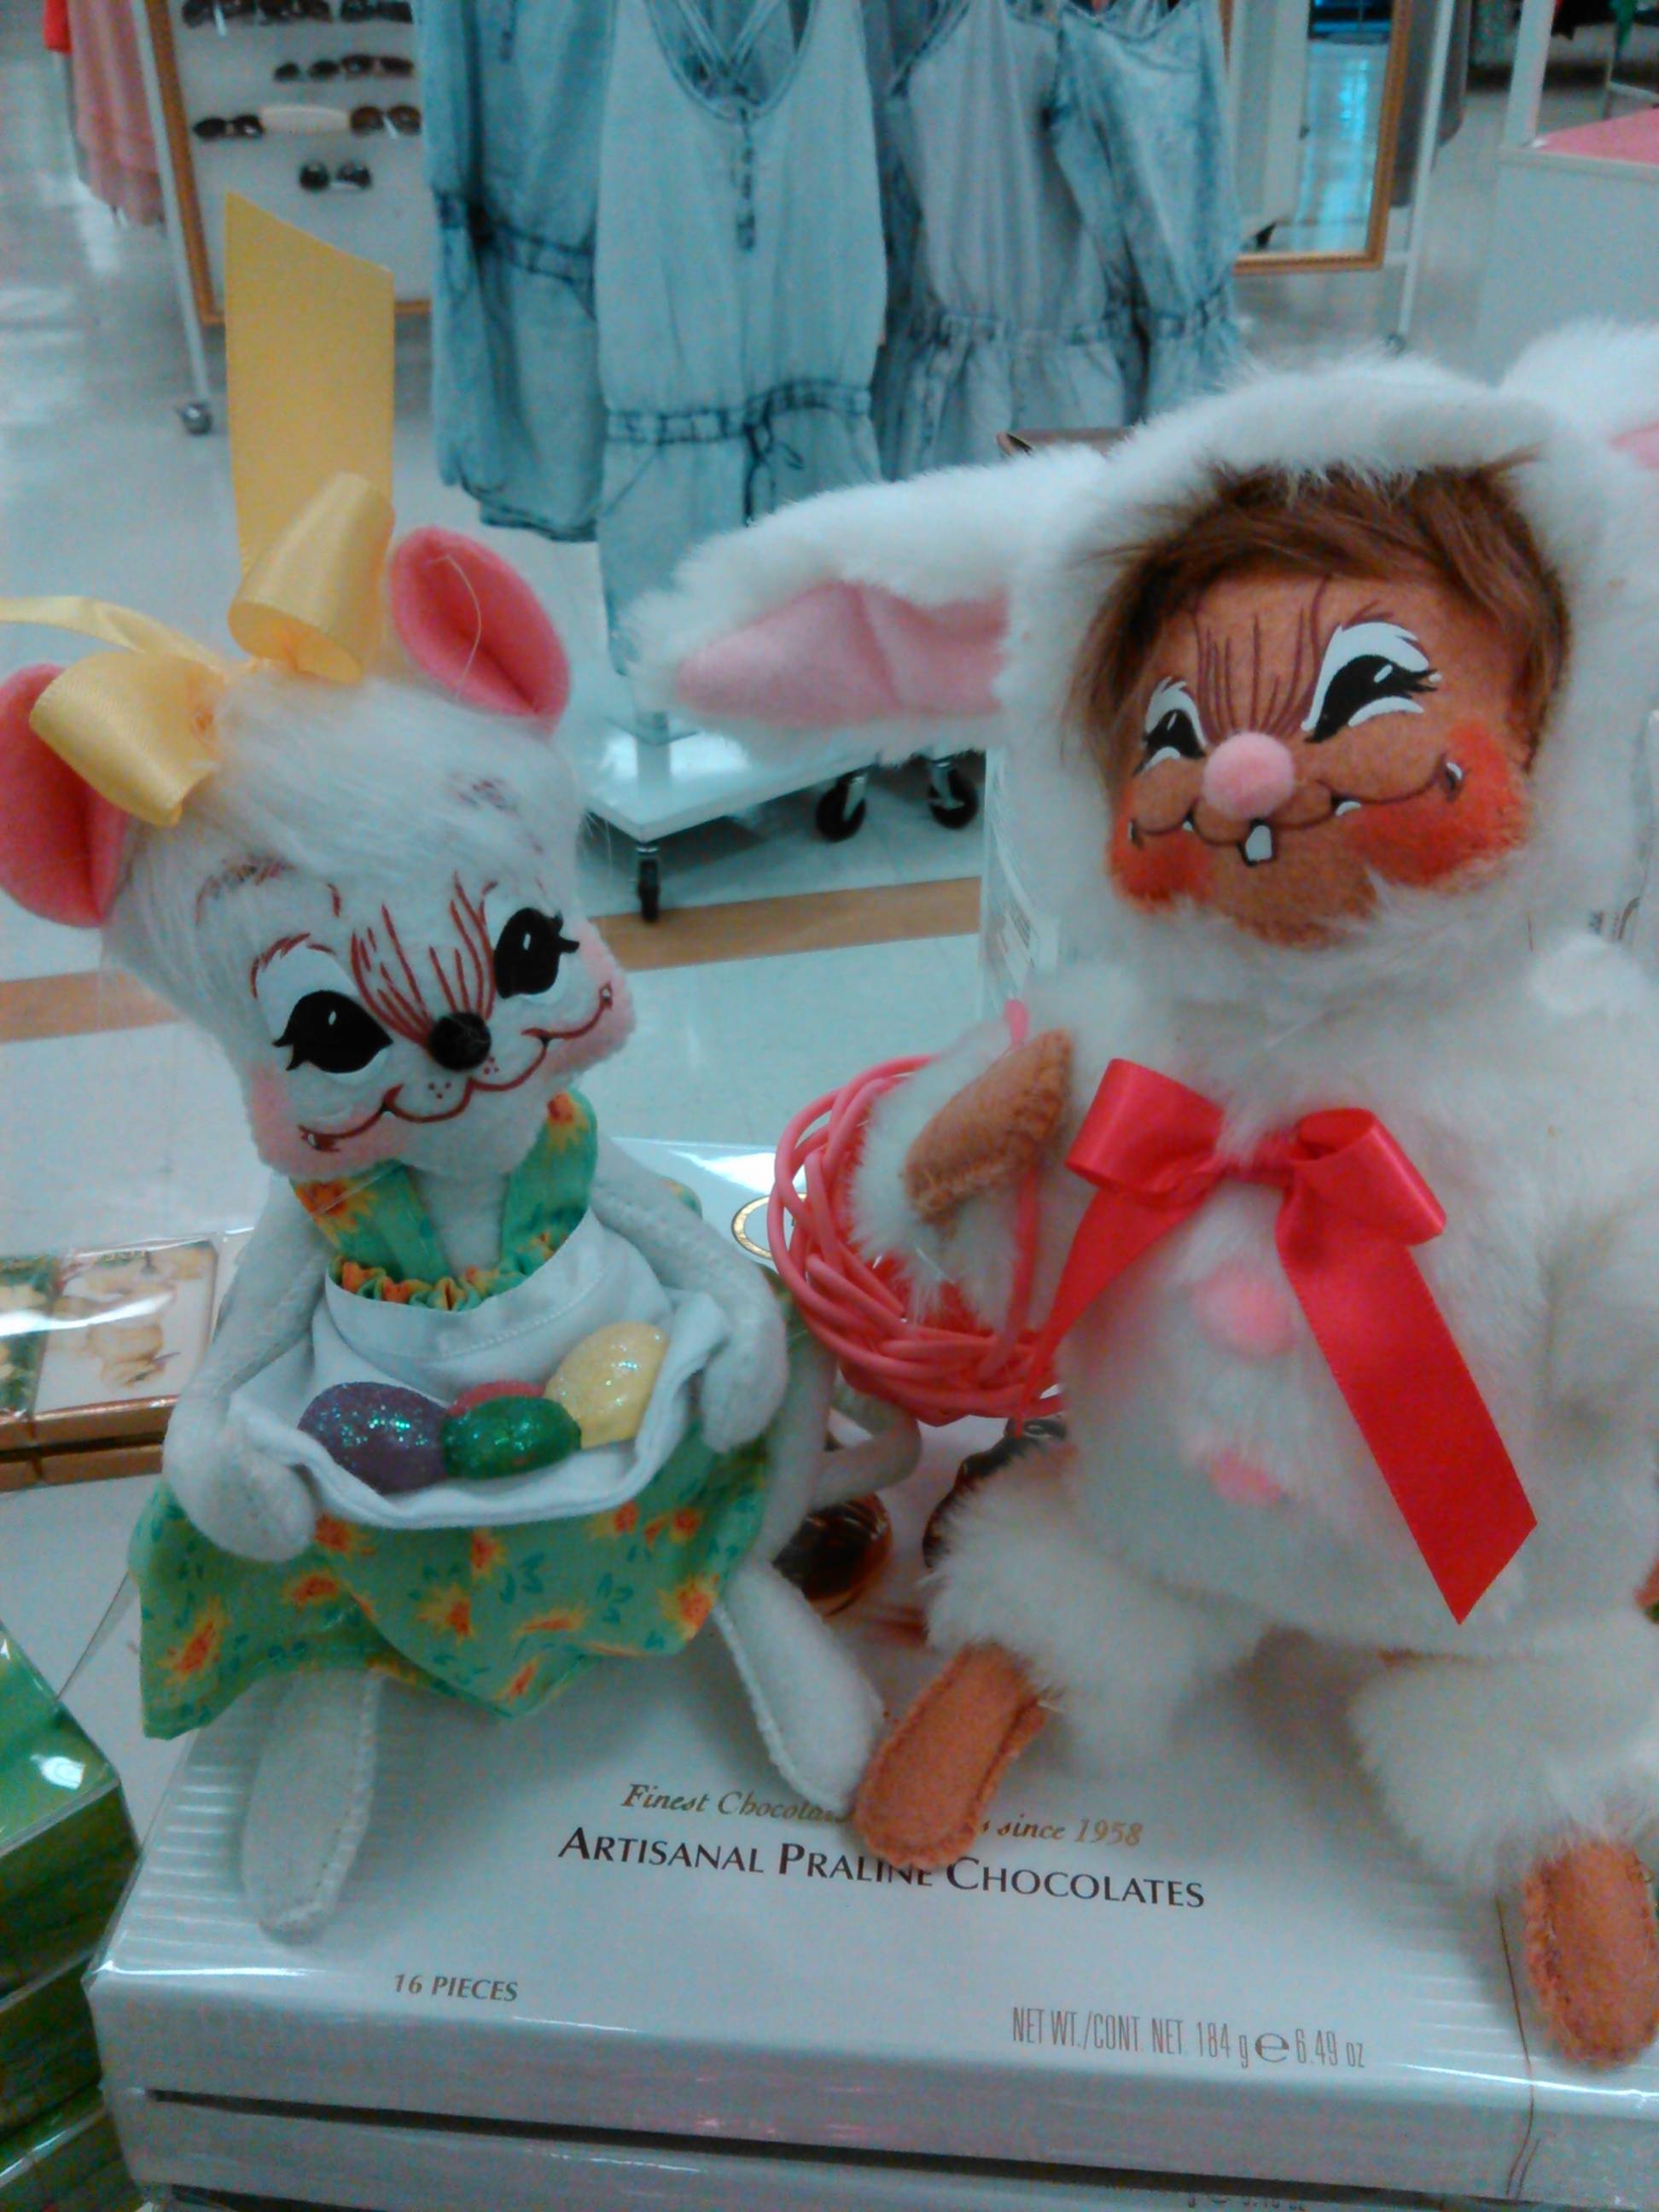 Creepy Easter decorations